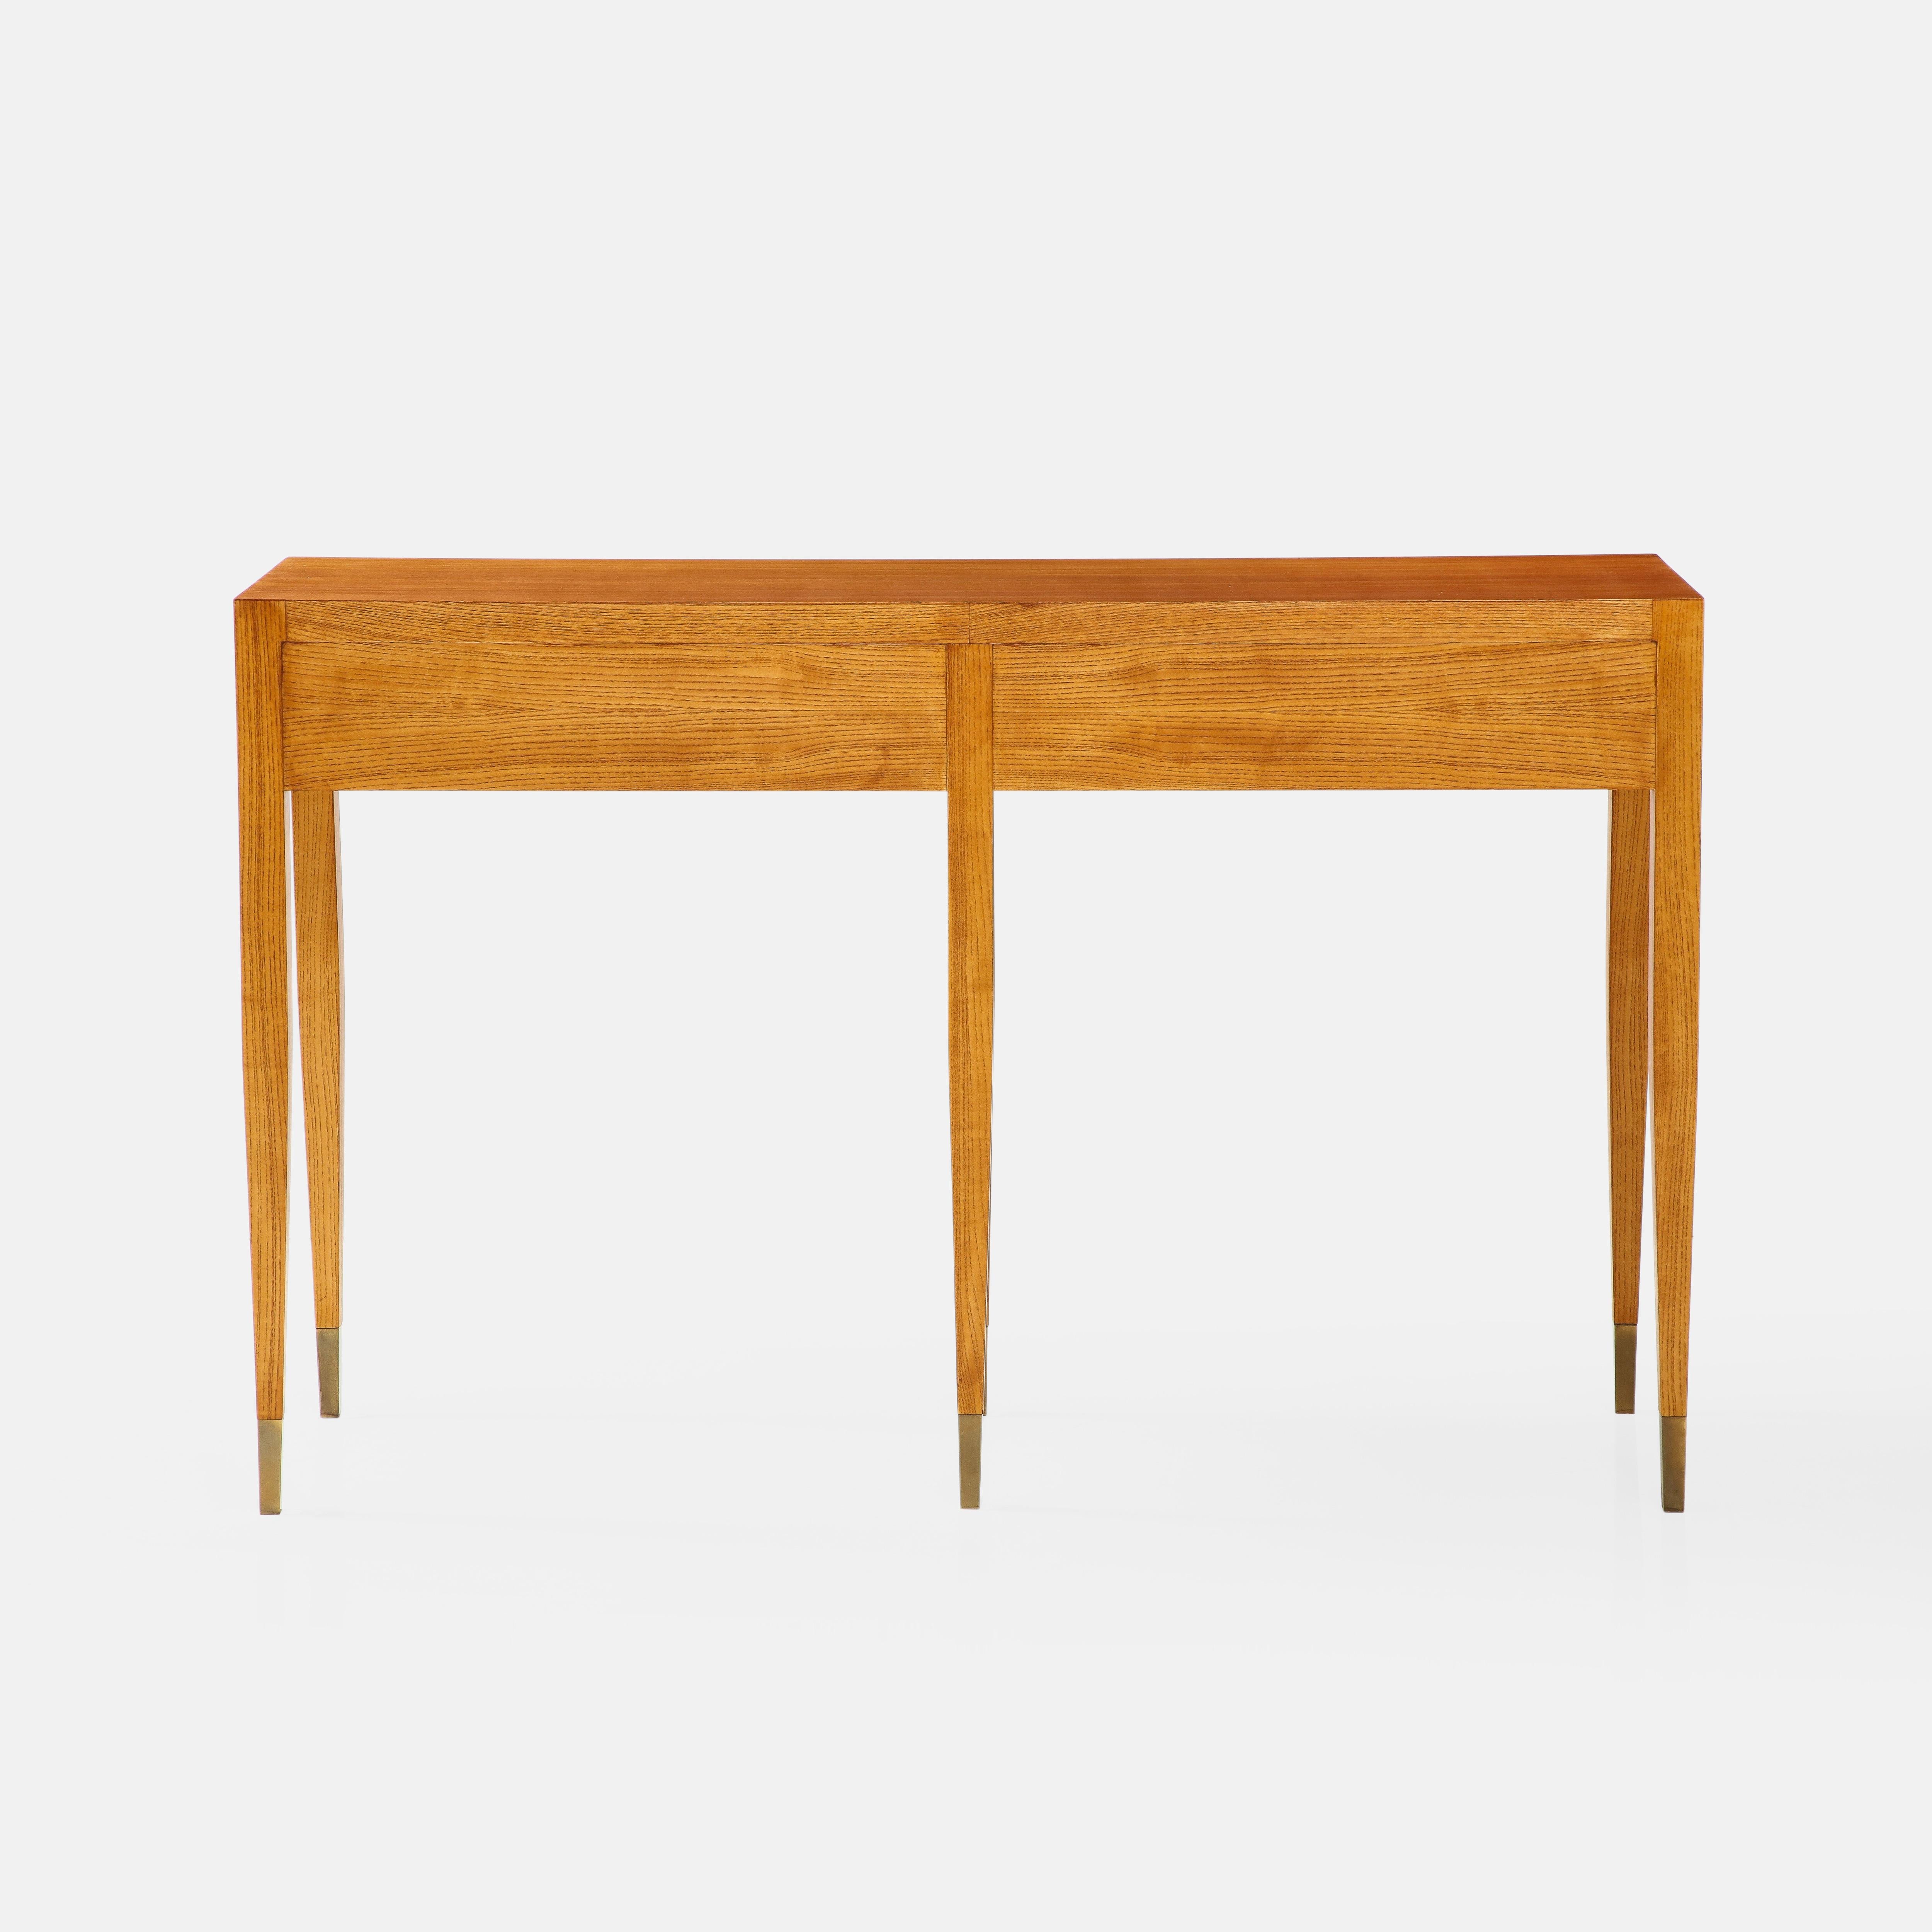 Gio Ponti for Giordano Chiesa Rare Pair of Ash Wood Consoles, Italy, 1950s For Sale 11